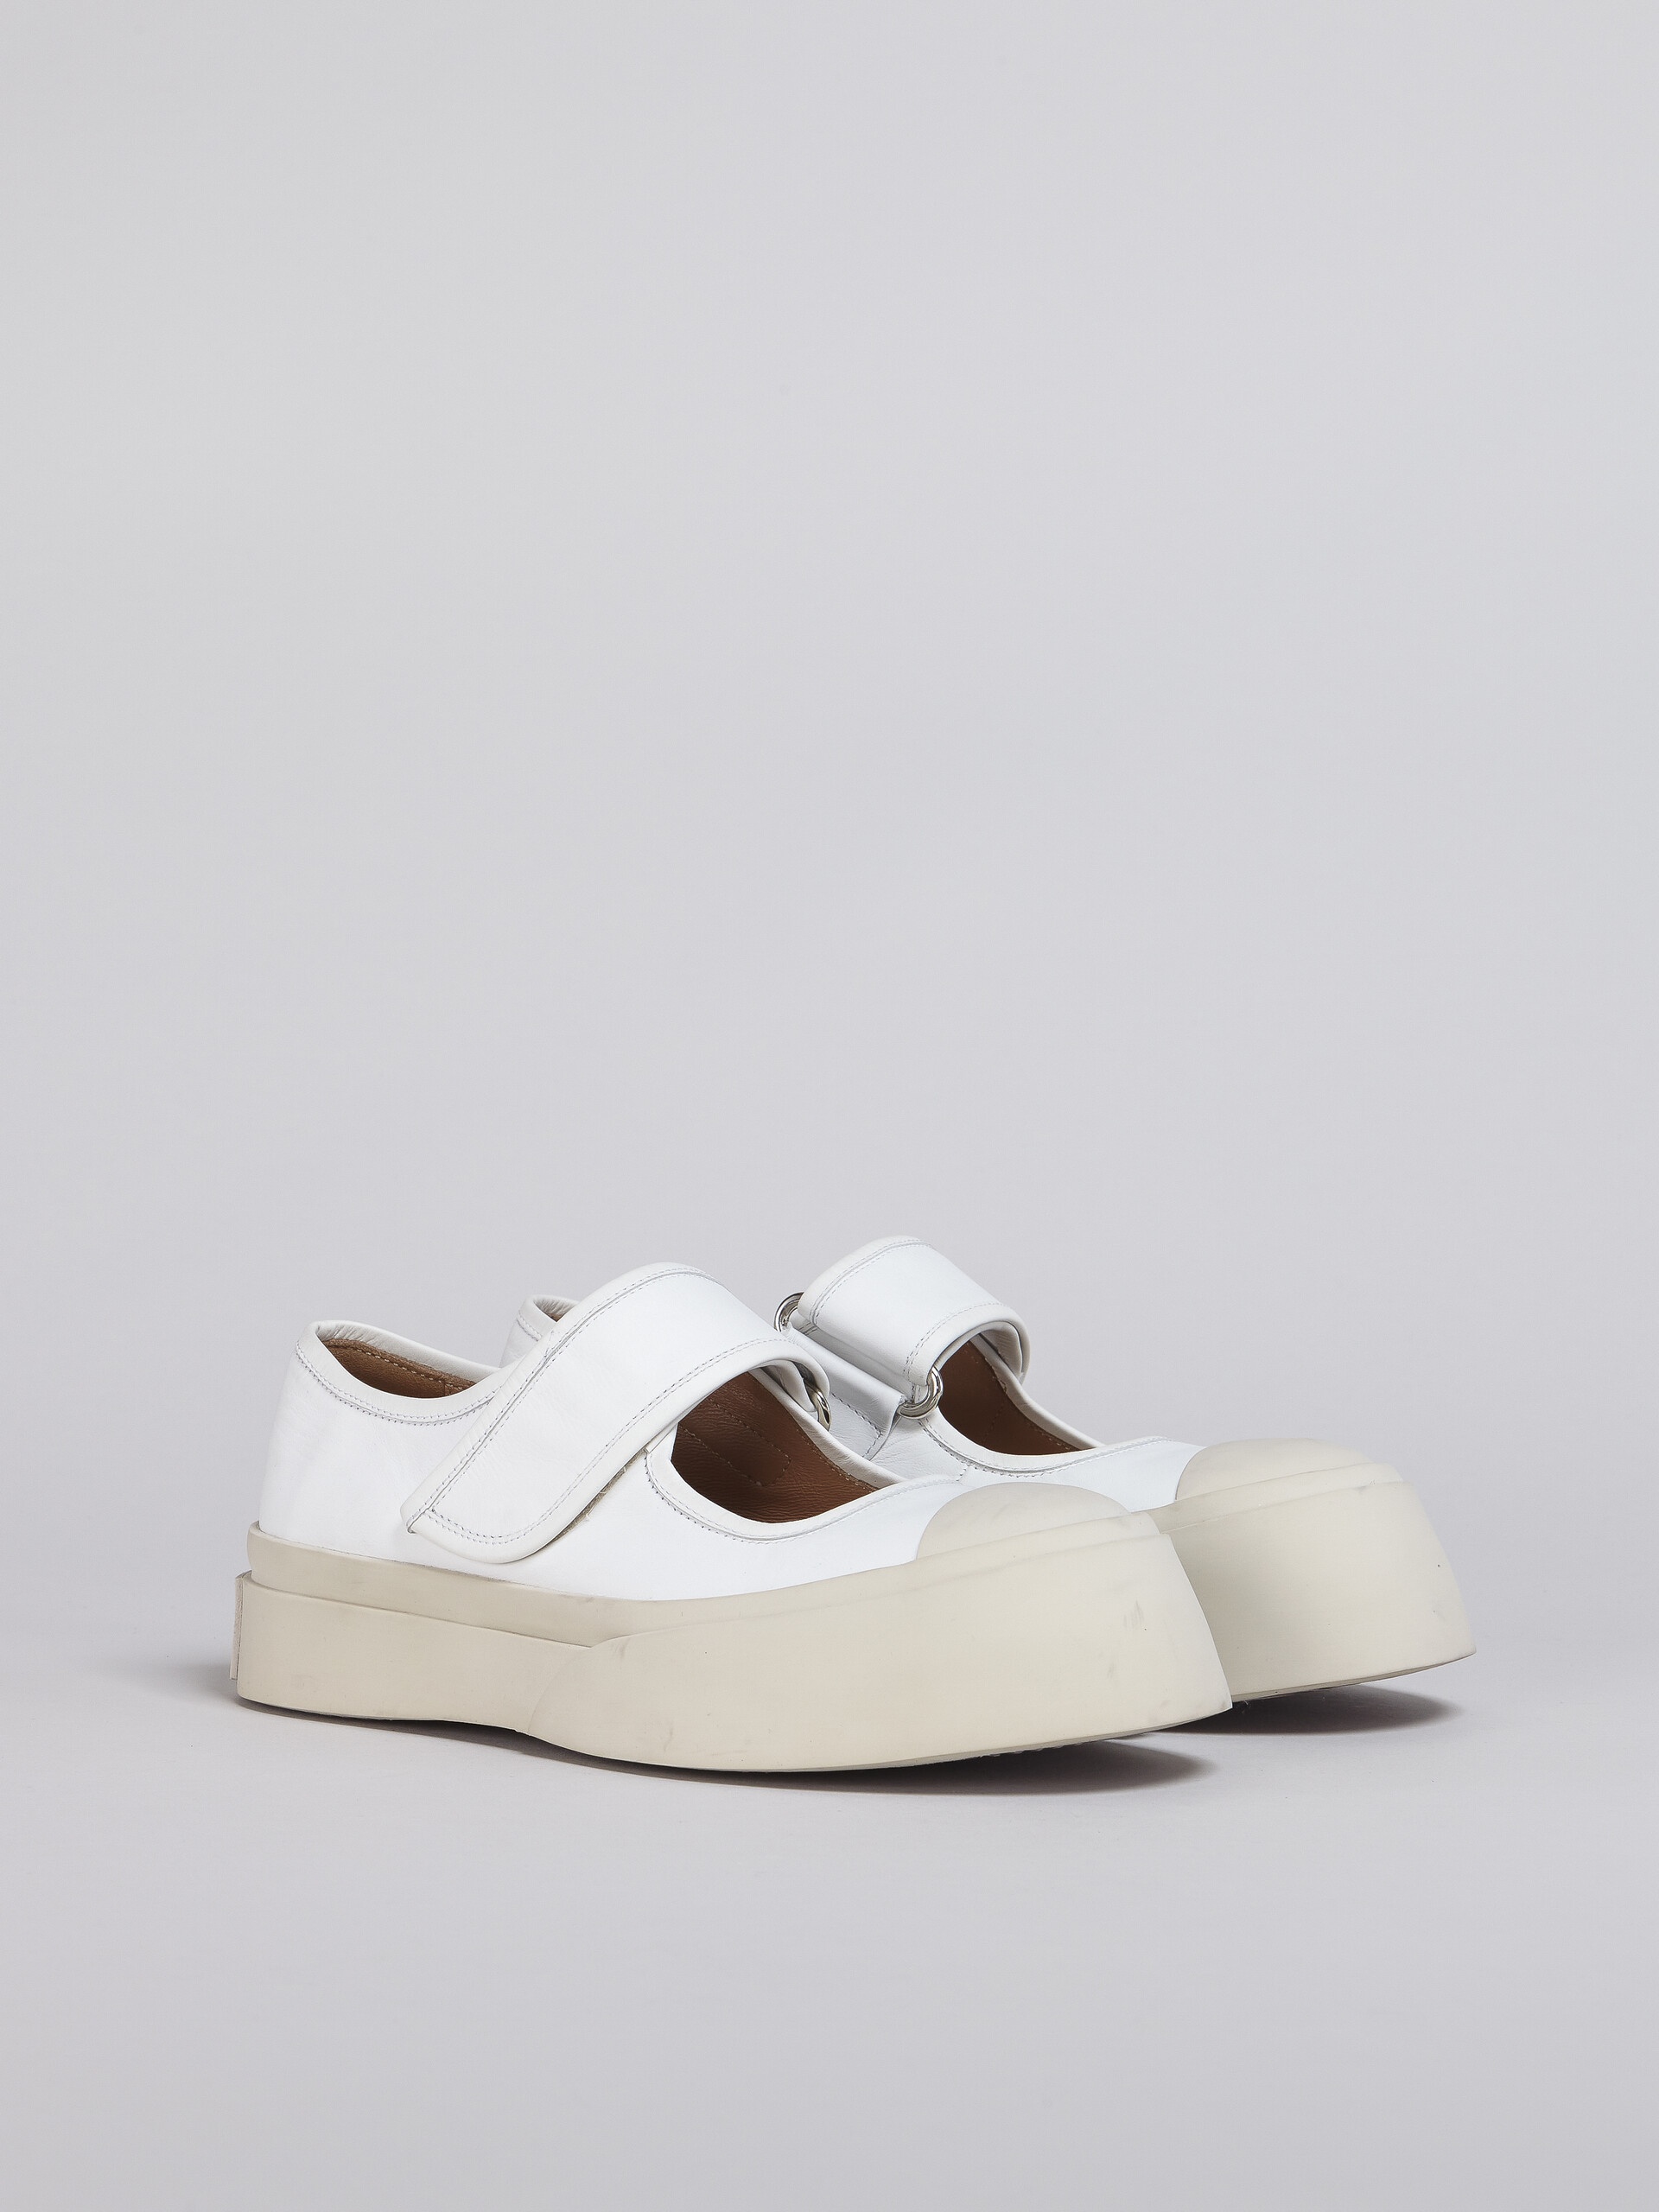 WHITE CALF LEATHER PABLO MARY-JANE SNEAKER - 2